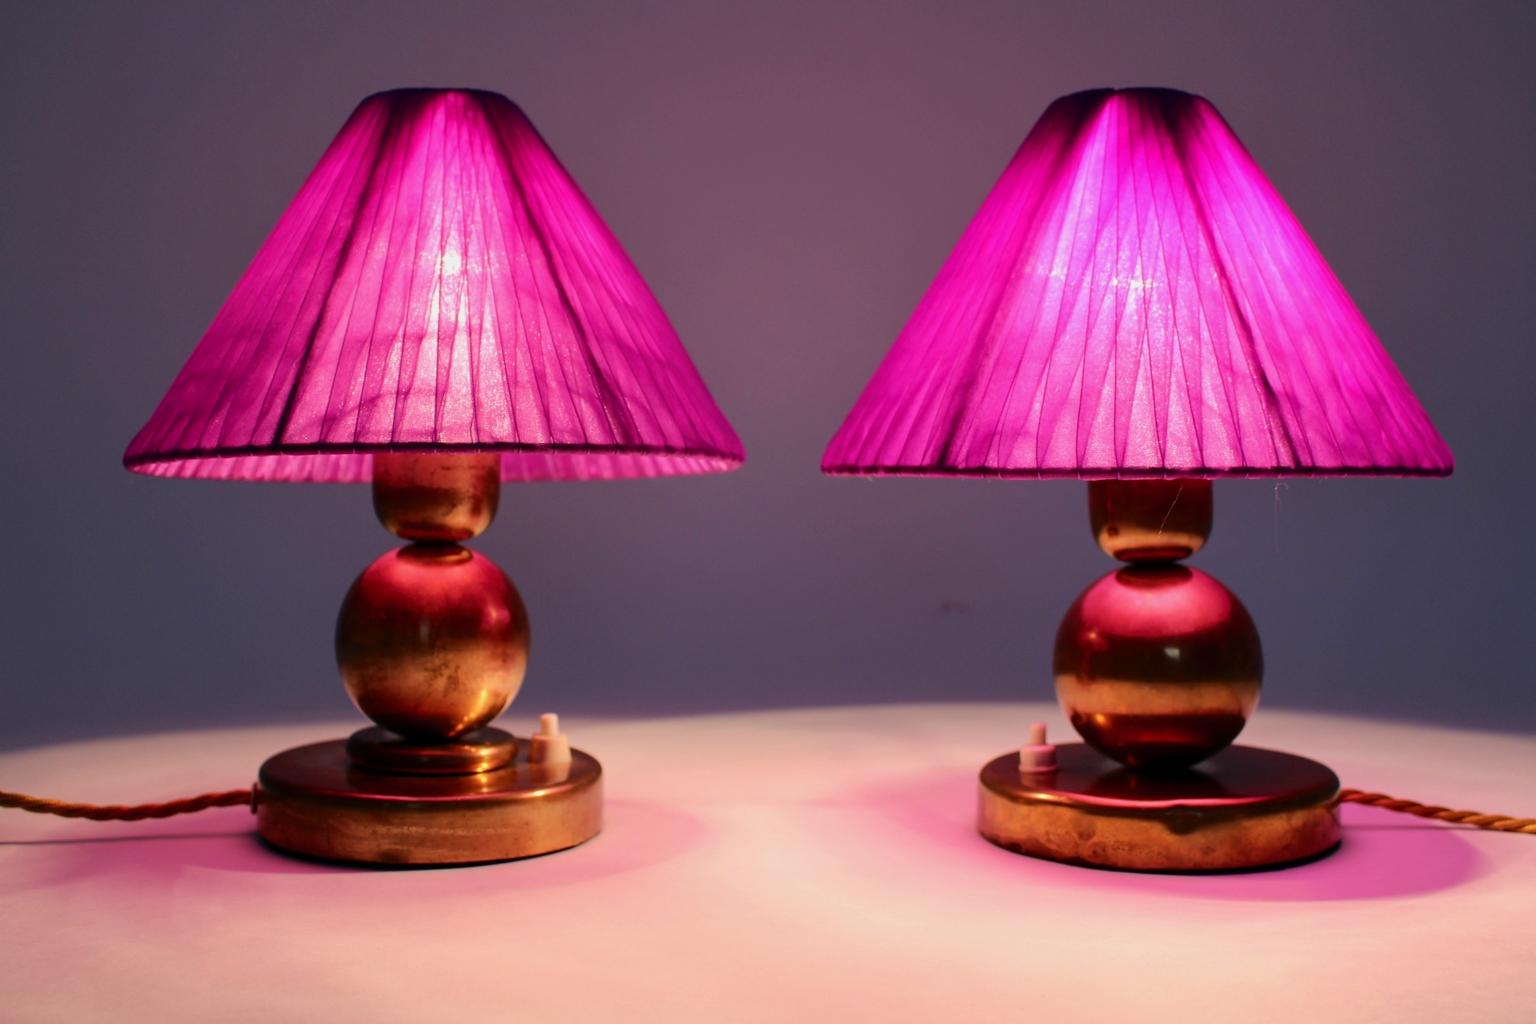 Mid-20th Century Art Deco Brass Vintage Table Lamps with Lilac Lamp Shade 1930s, France